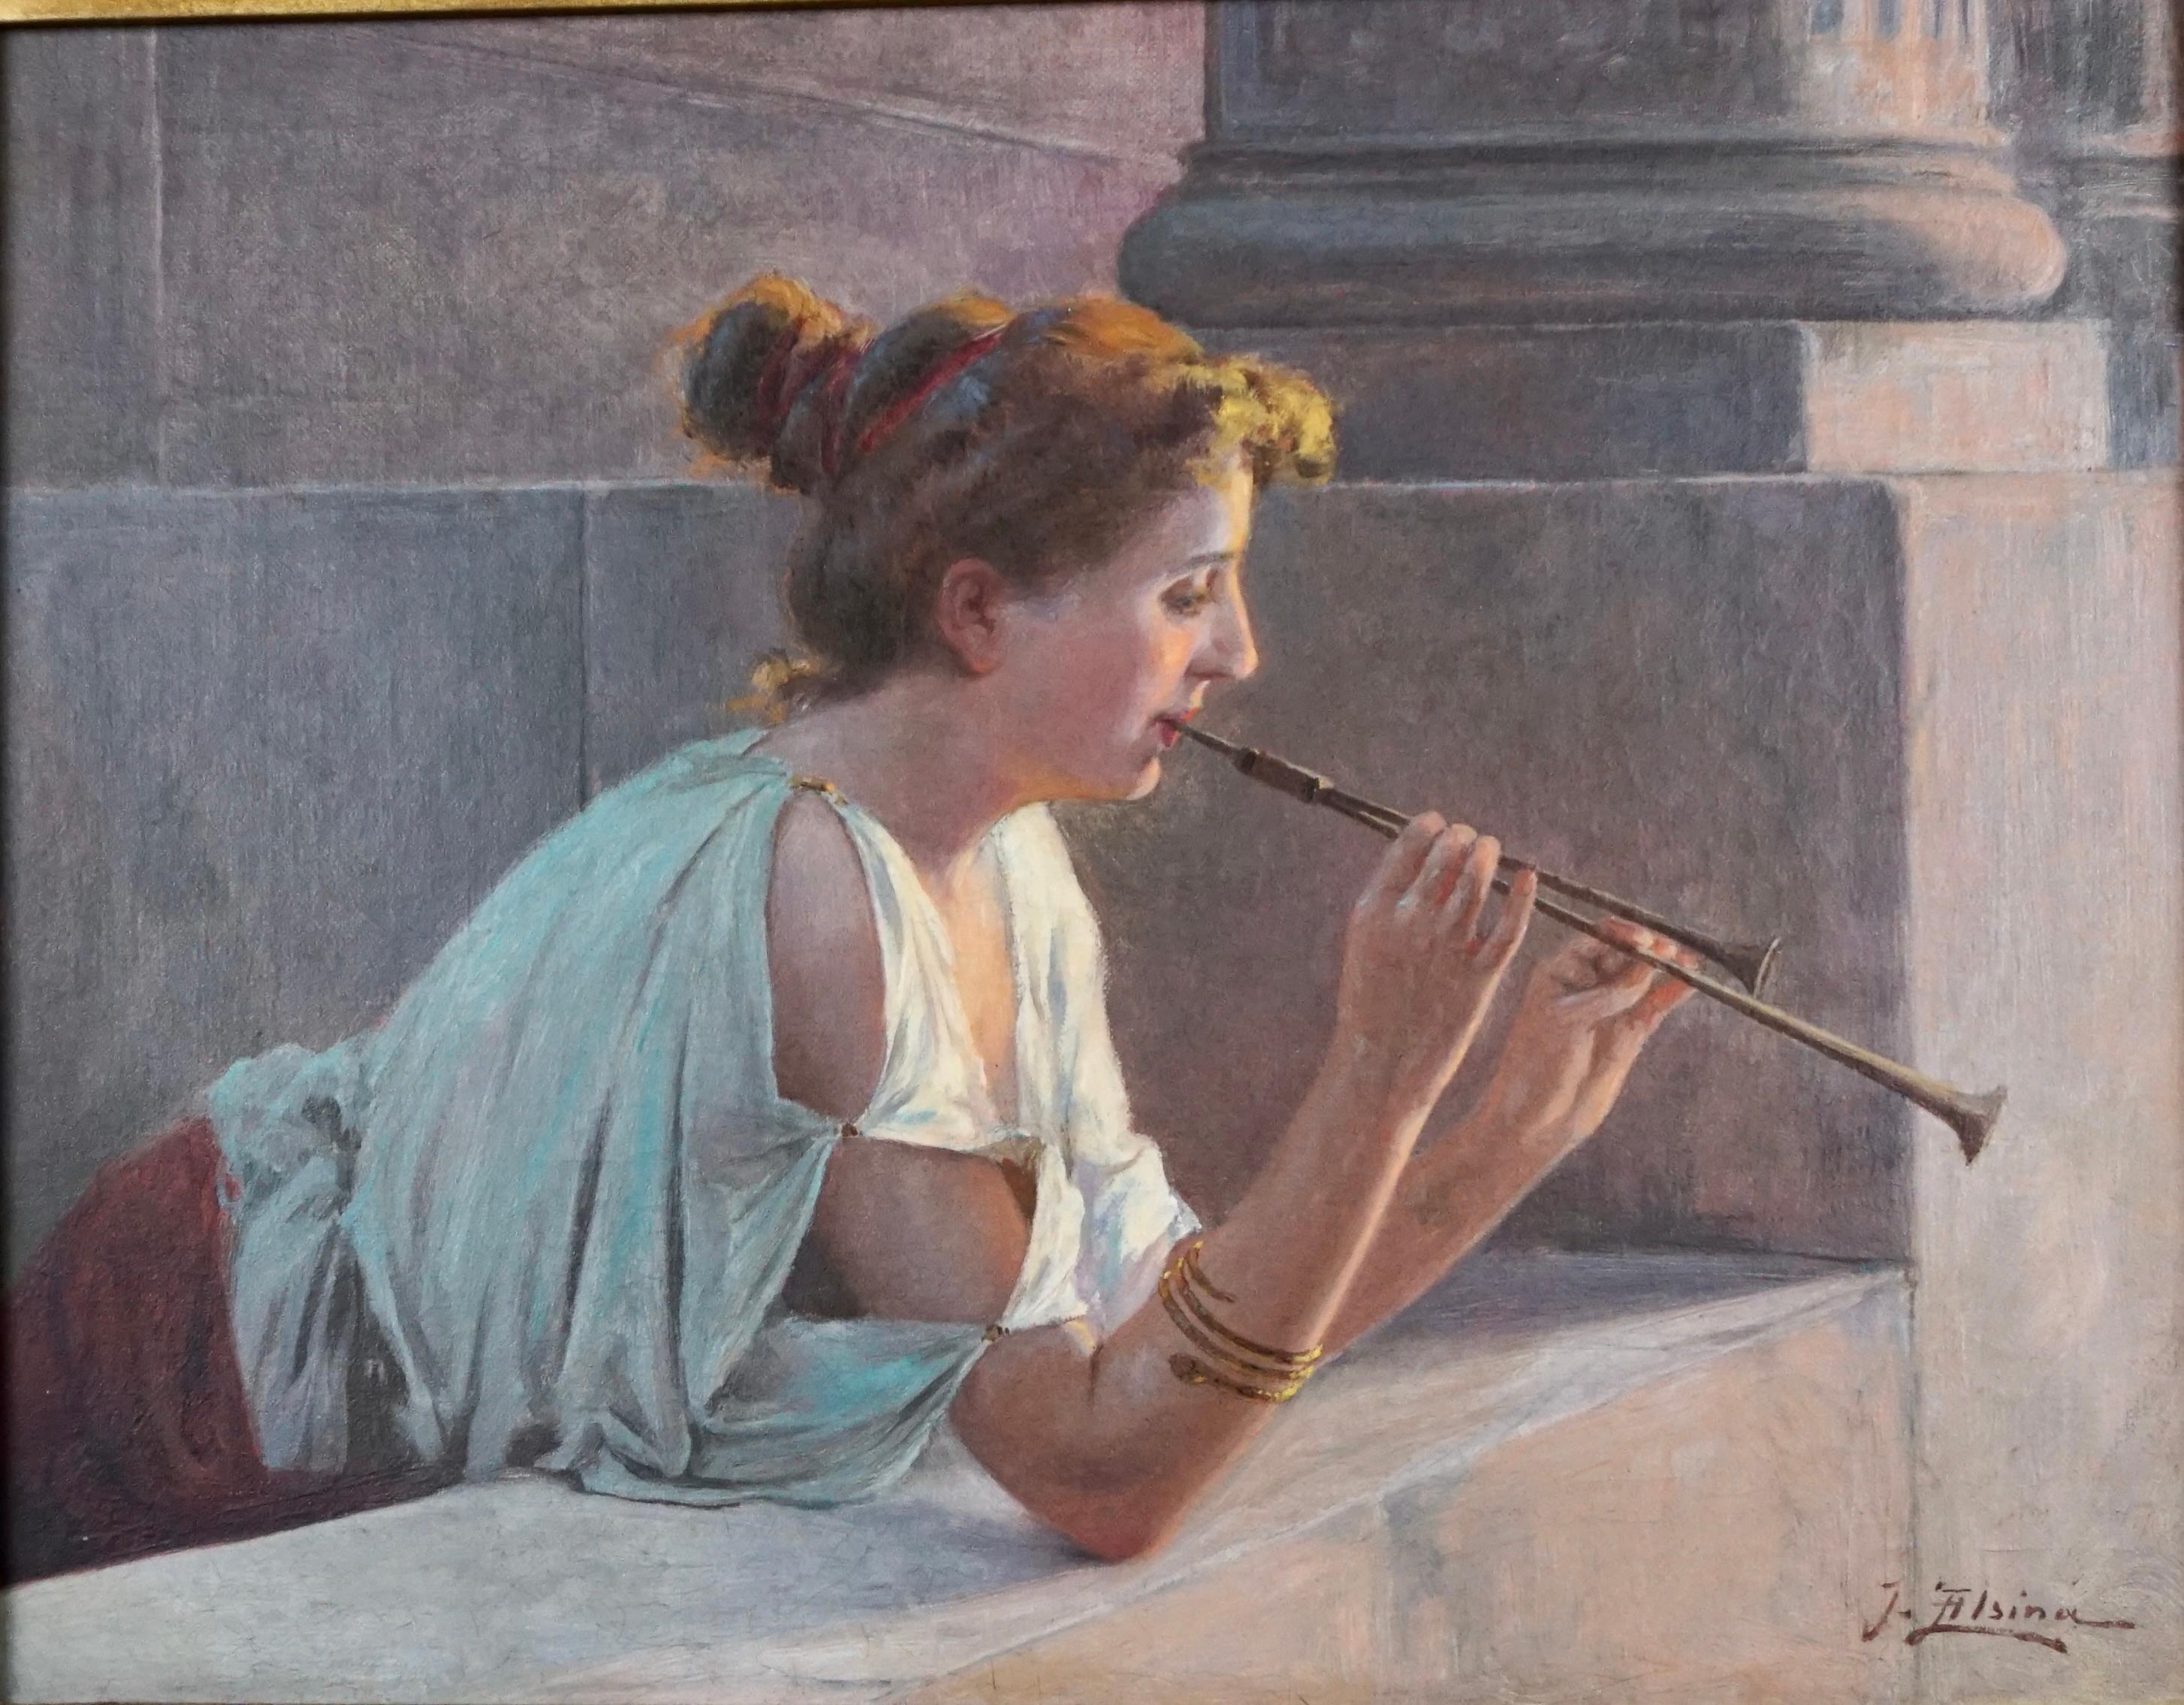 Goatskin Elegant Oil on Canvas of a Flutist by Jacques Alsina 'French 19th Century'